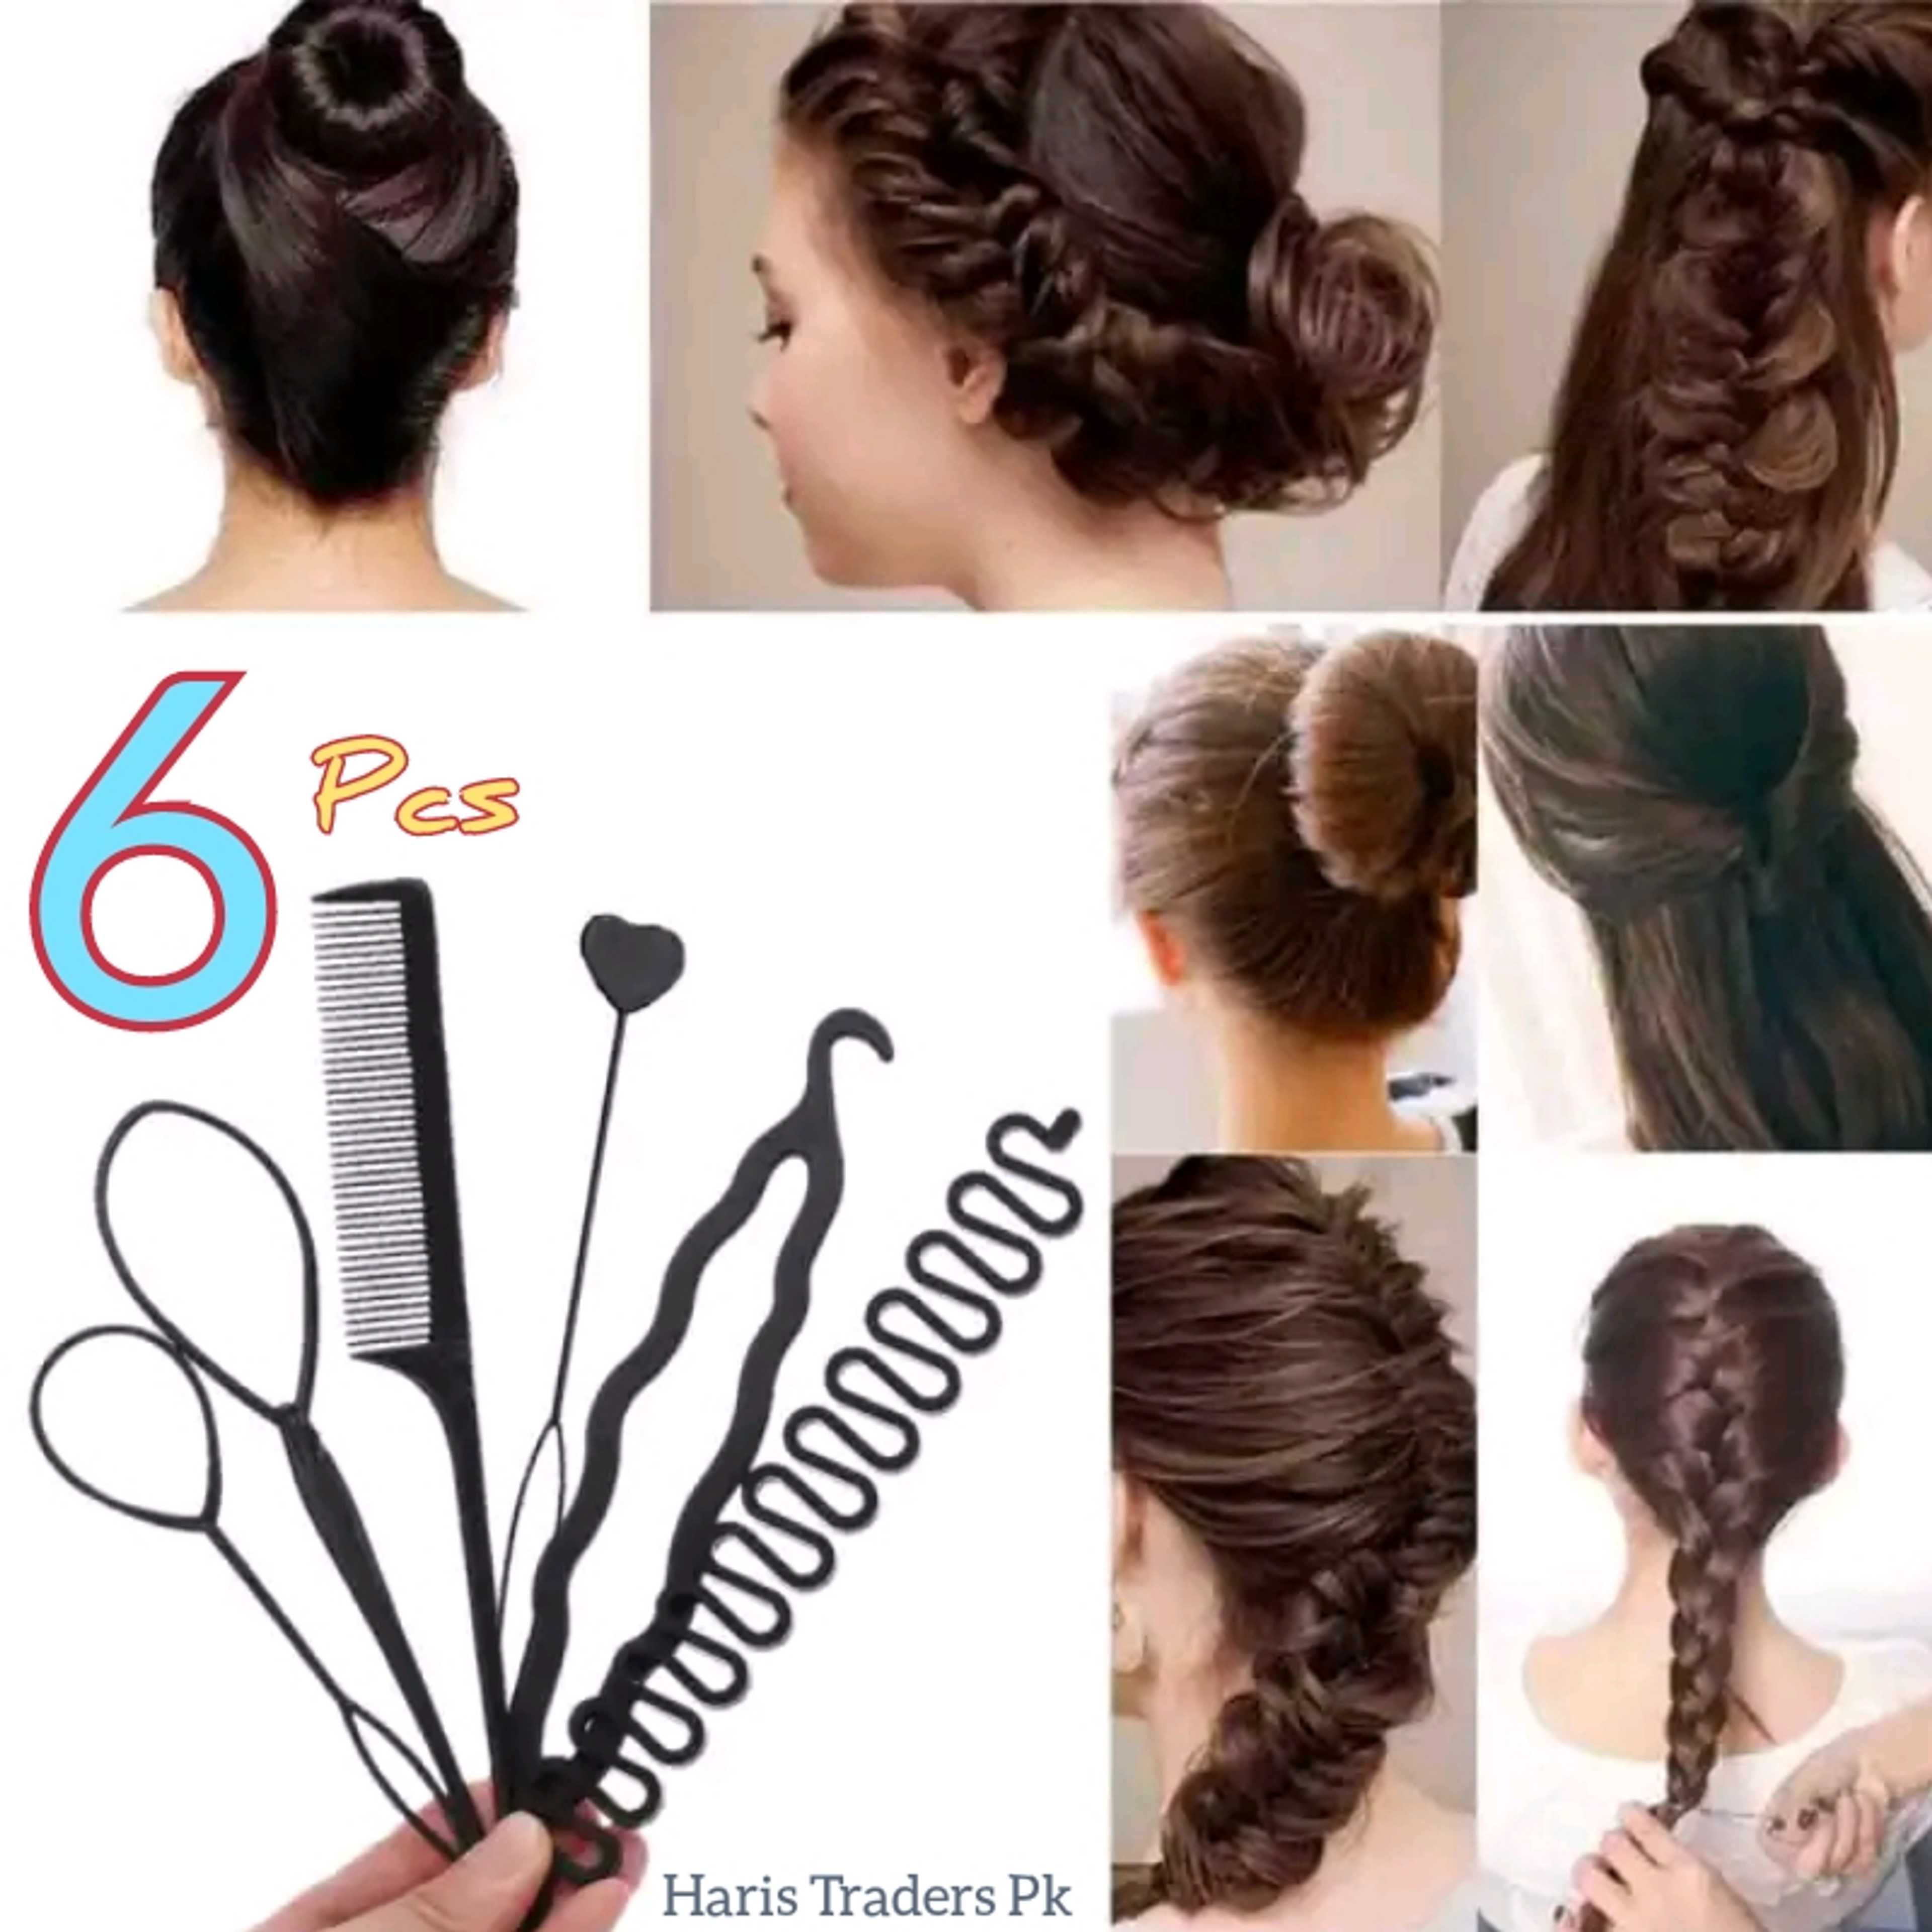 Hair Style Tools (Set Of 6 Pcs), Hair Accessories for girls,